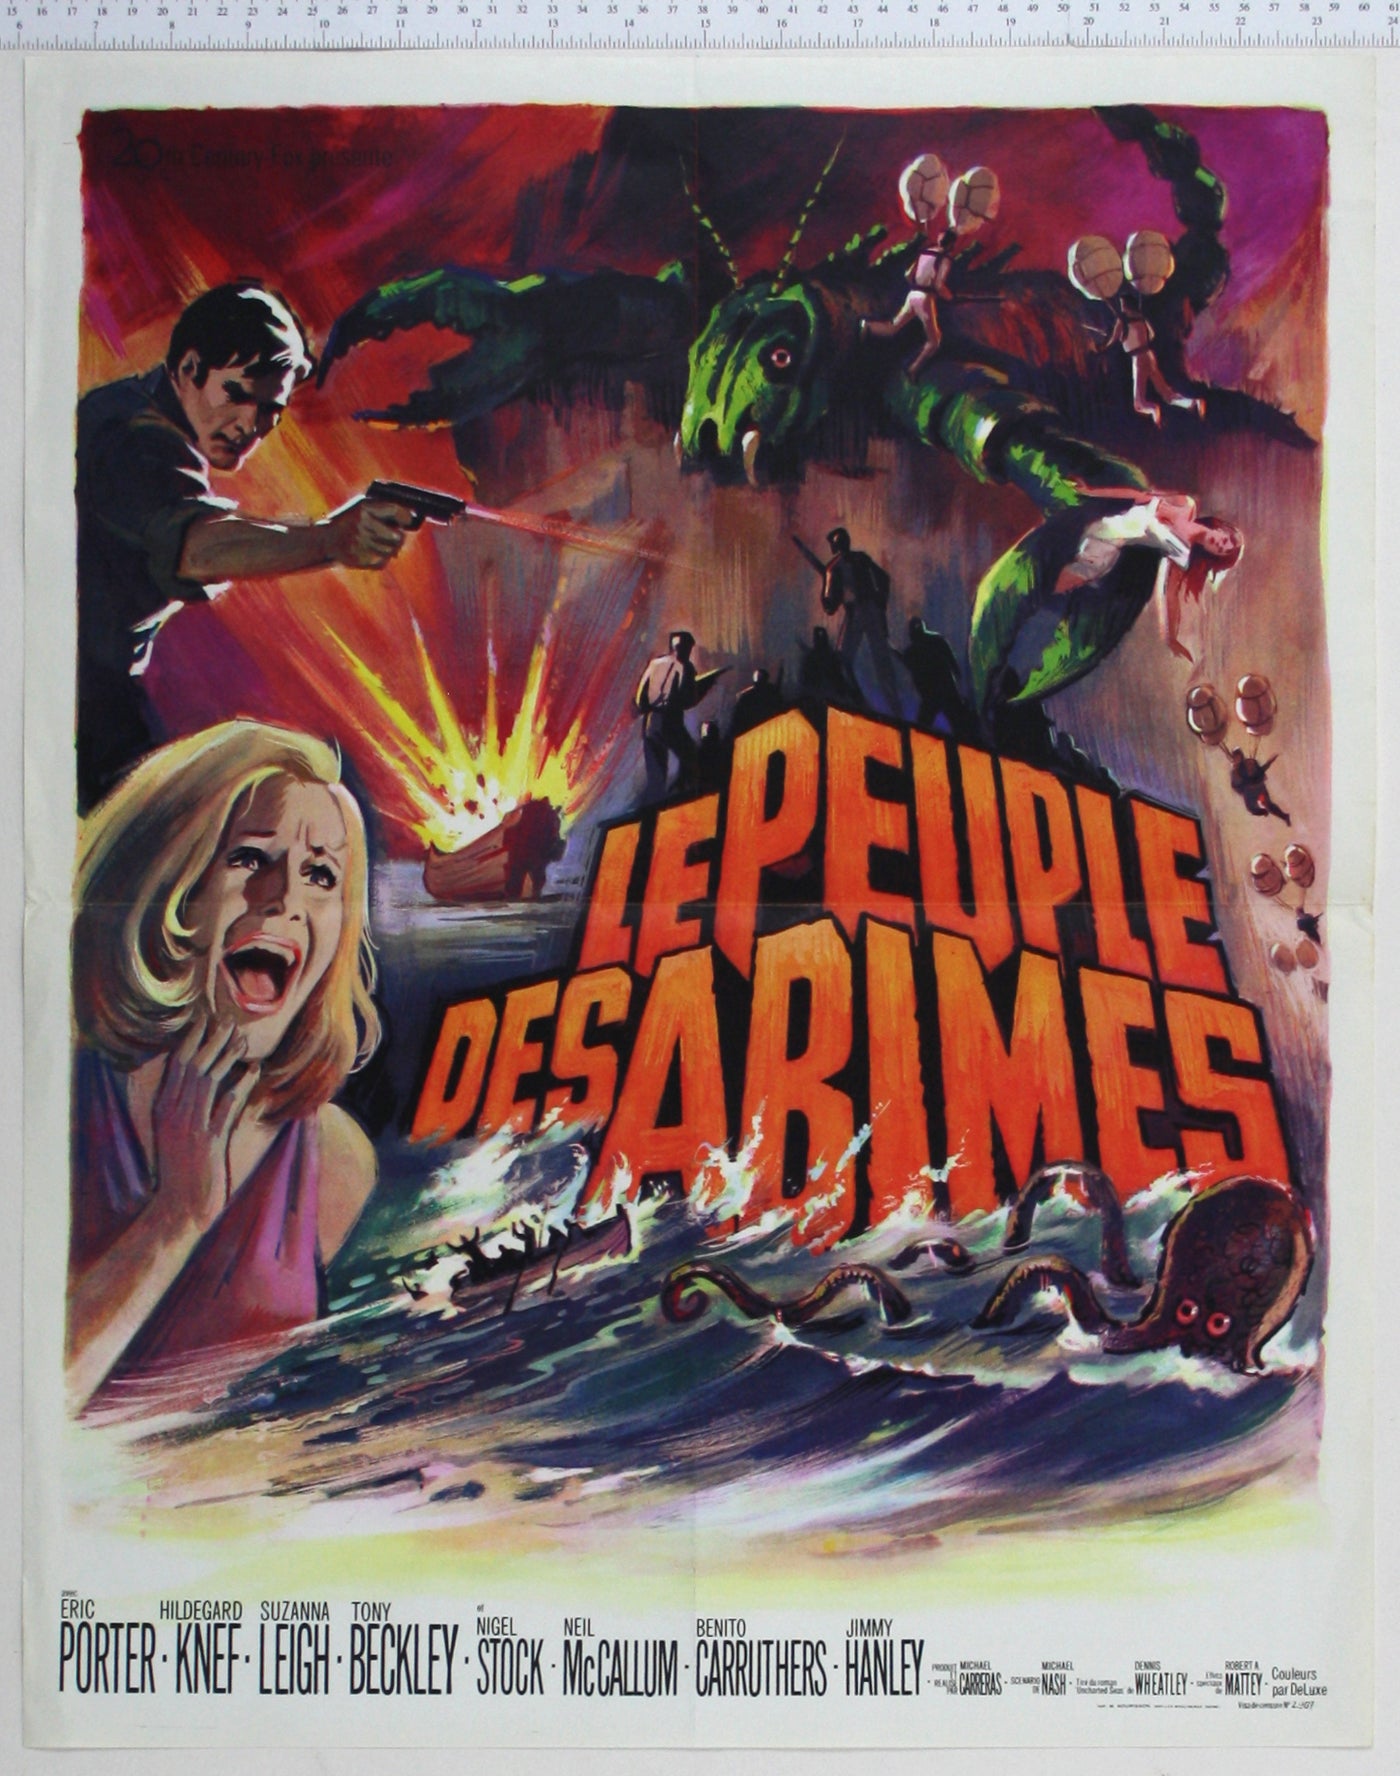 Artwork of screaming woman, octopus, giant crab with victim, people suspended on balloons, man fires gun, explodes ship.